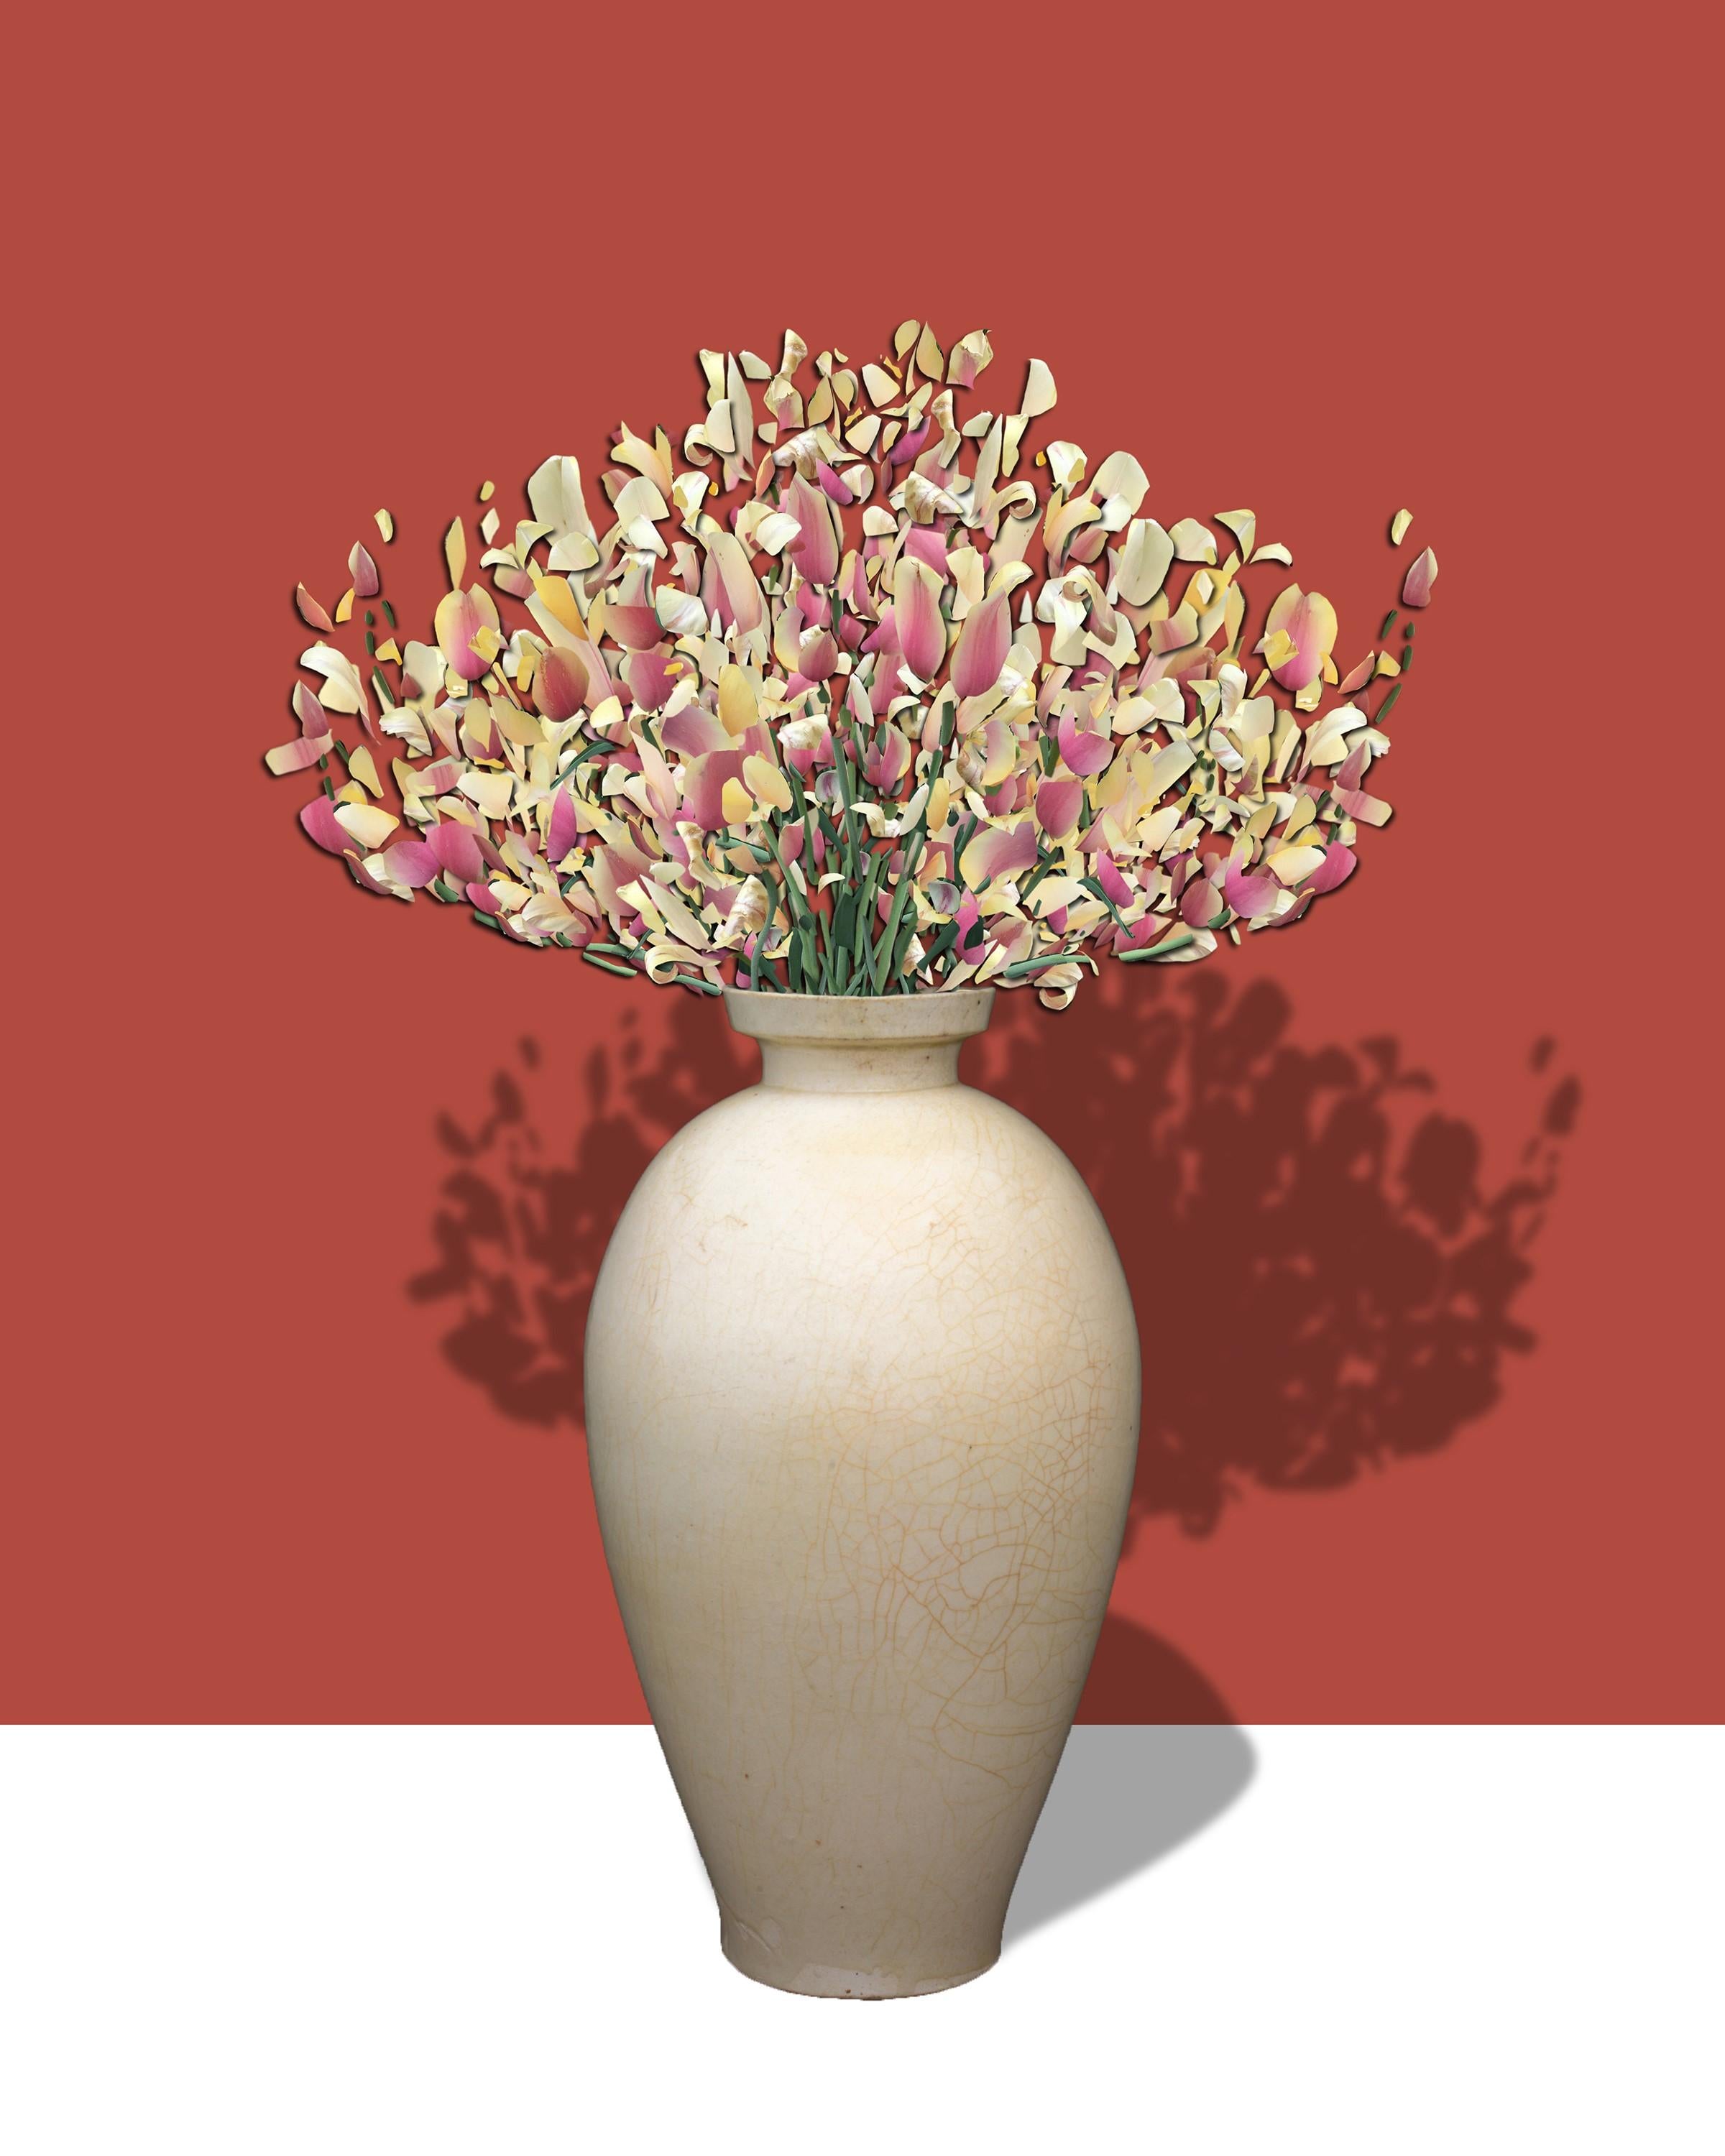 Bryan Meador Color Photograph - Contessa 1000 AD: Abstract Flower Still Life of Antique Vase on Coral Background